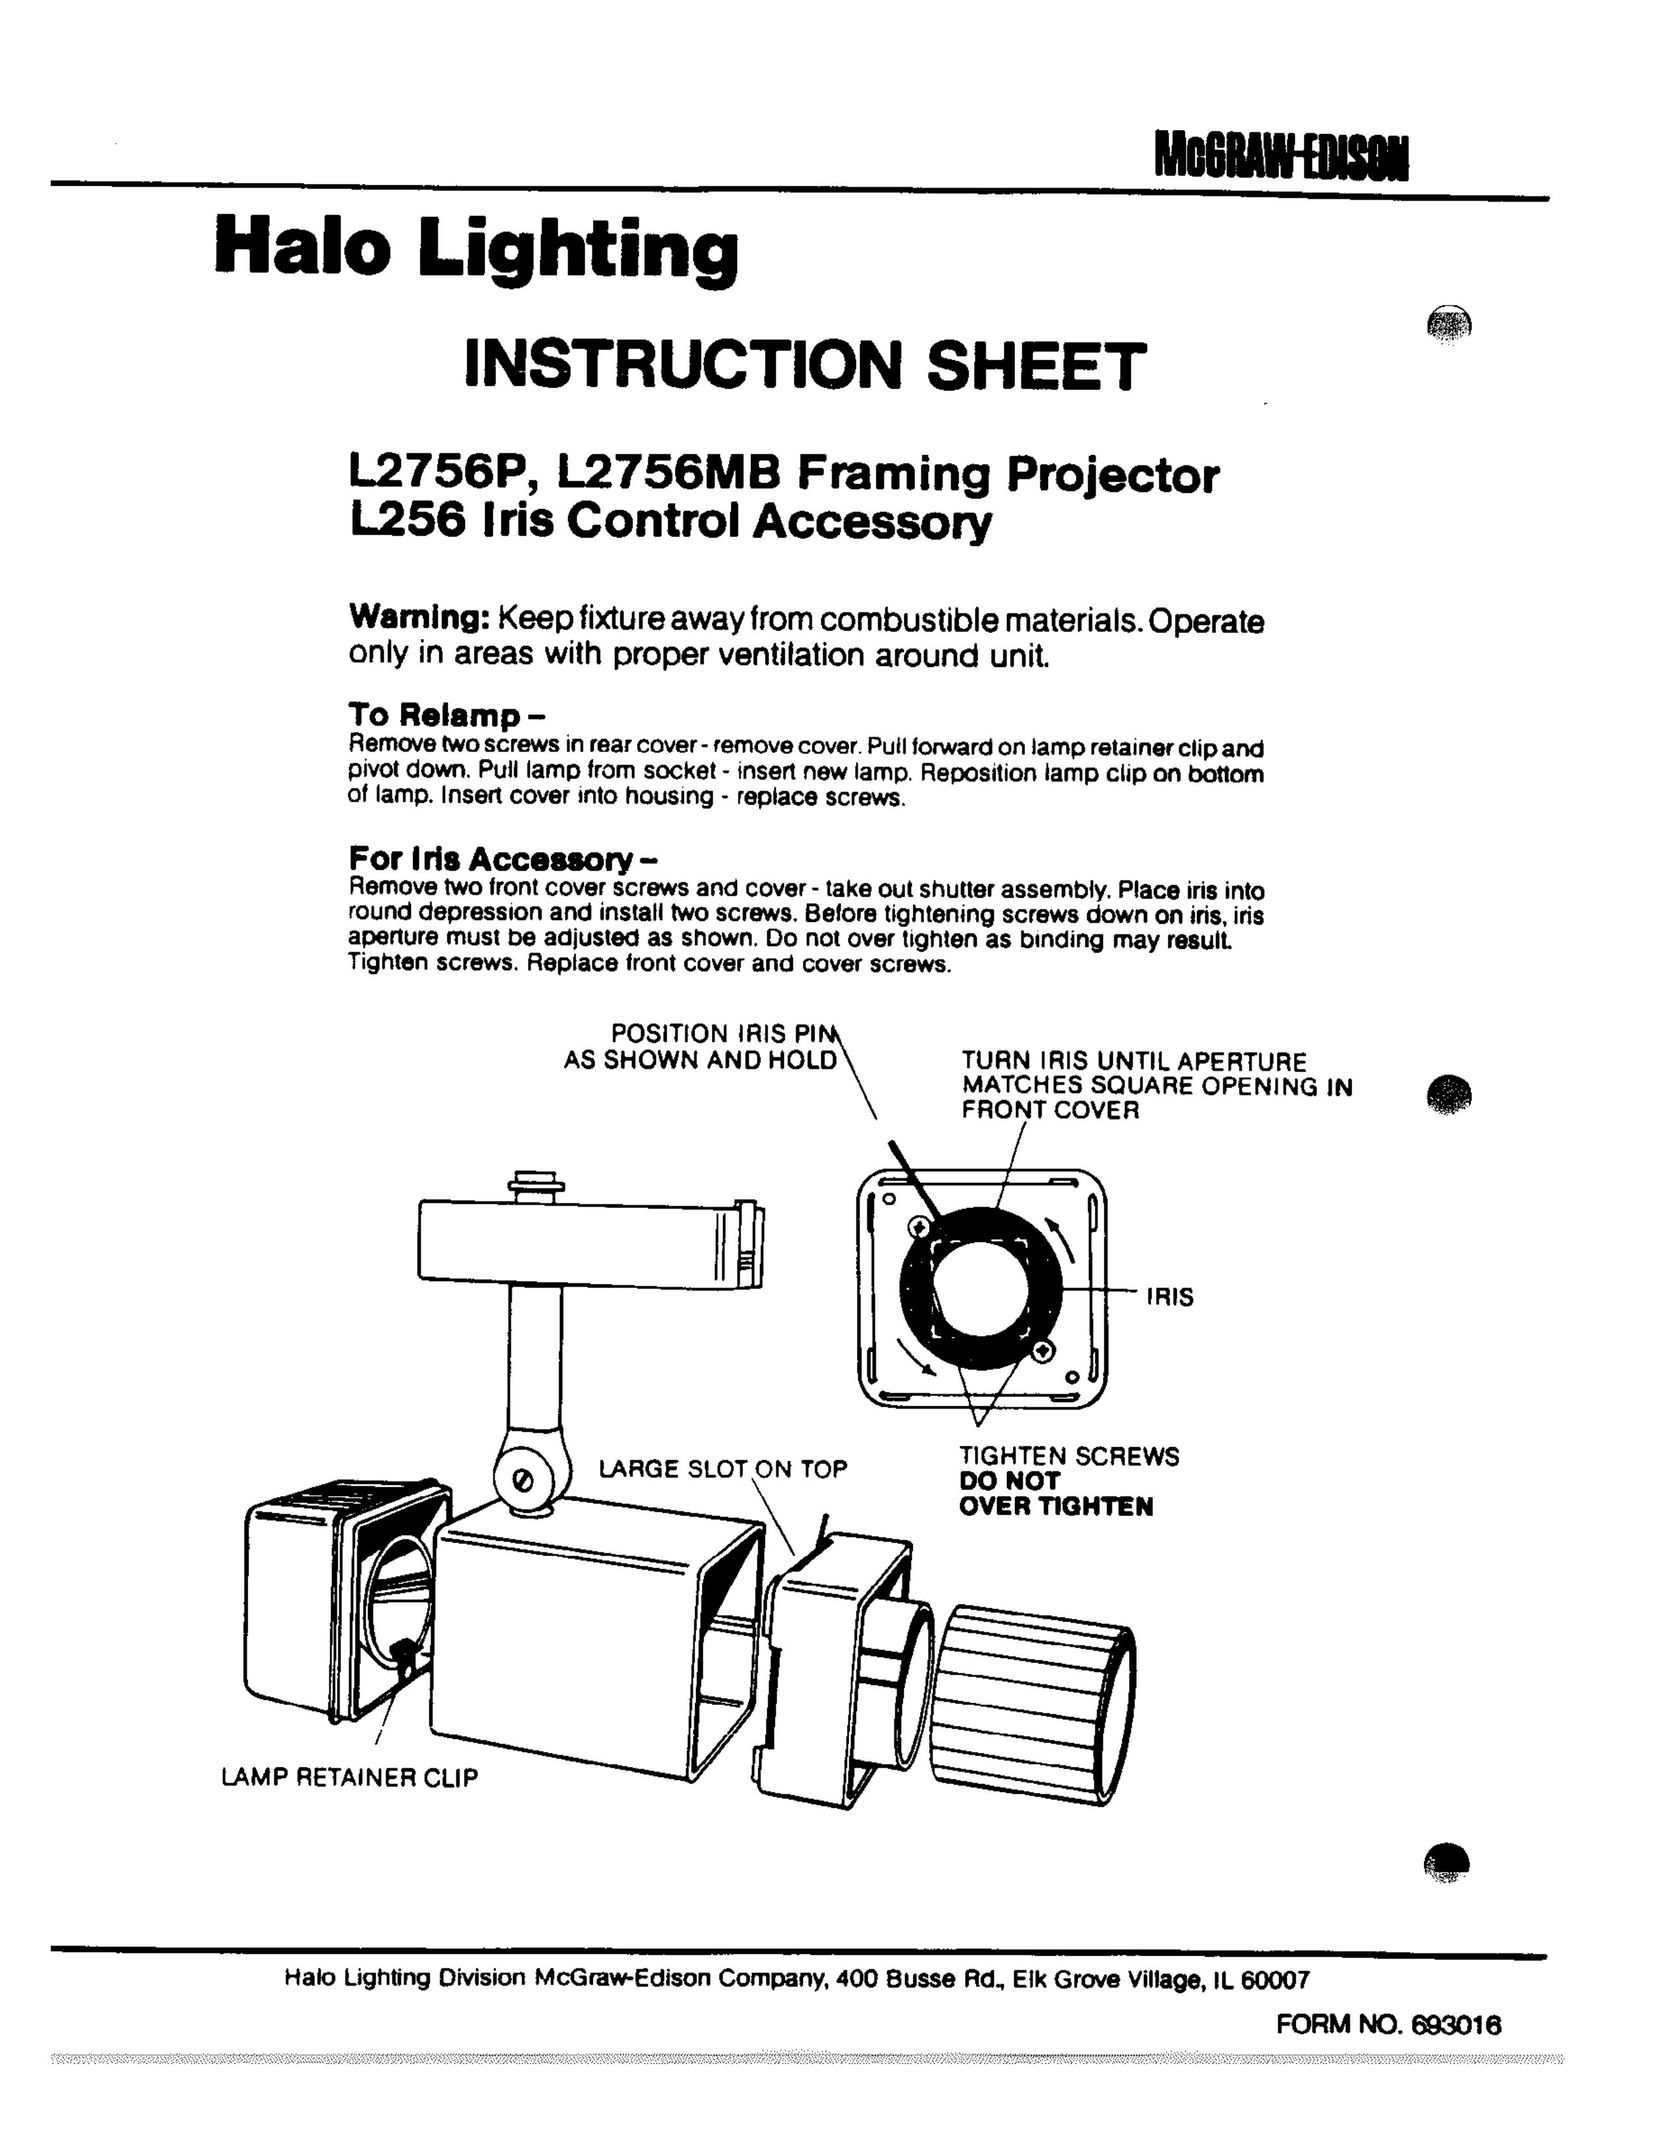 Halo Lighting System L2756P Projector User Manual